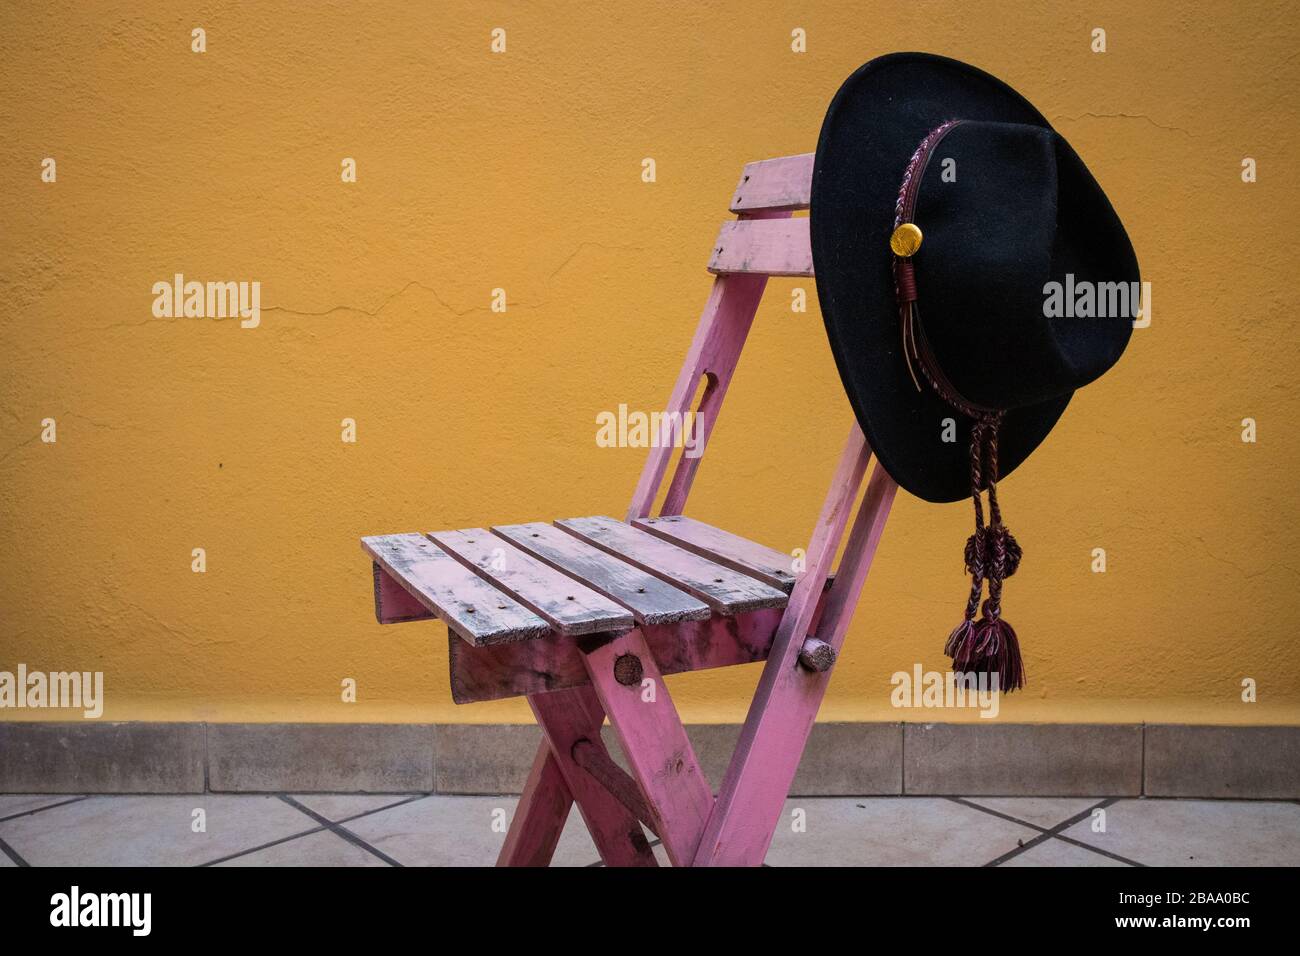 Black Cowboy Hat Hanging on Pink Chair Stock Photo